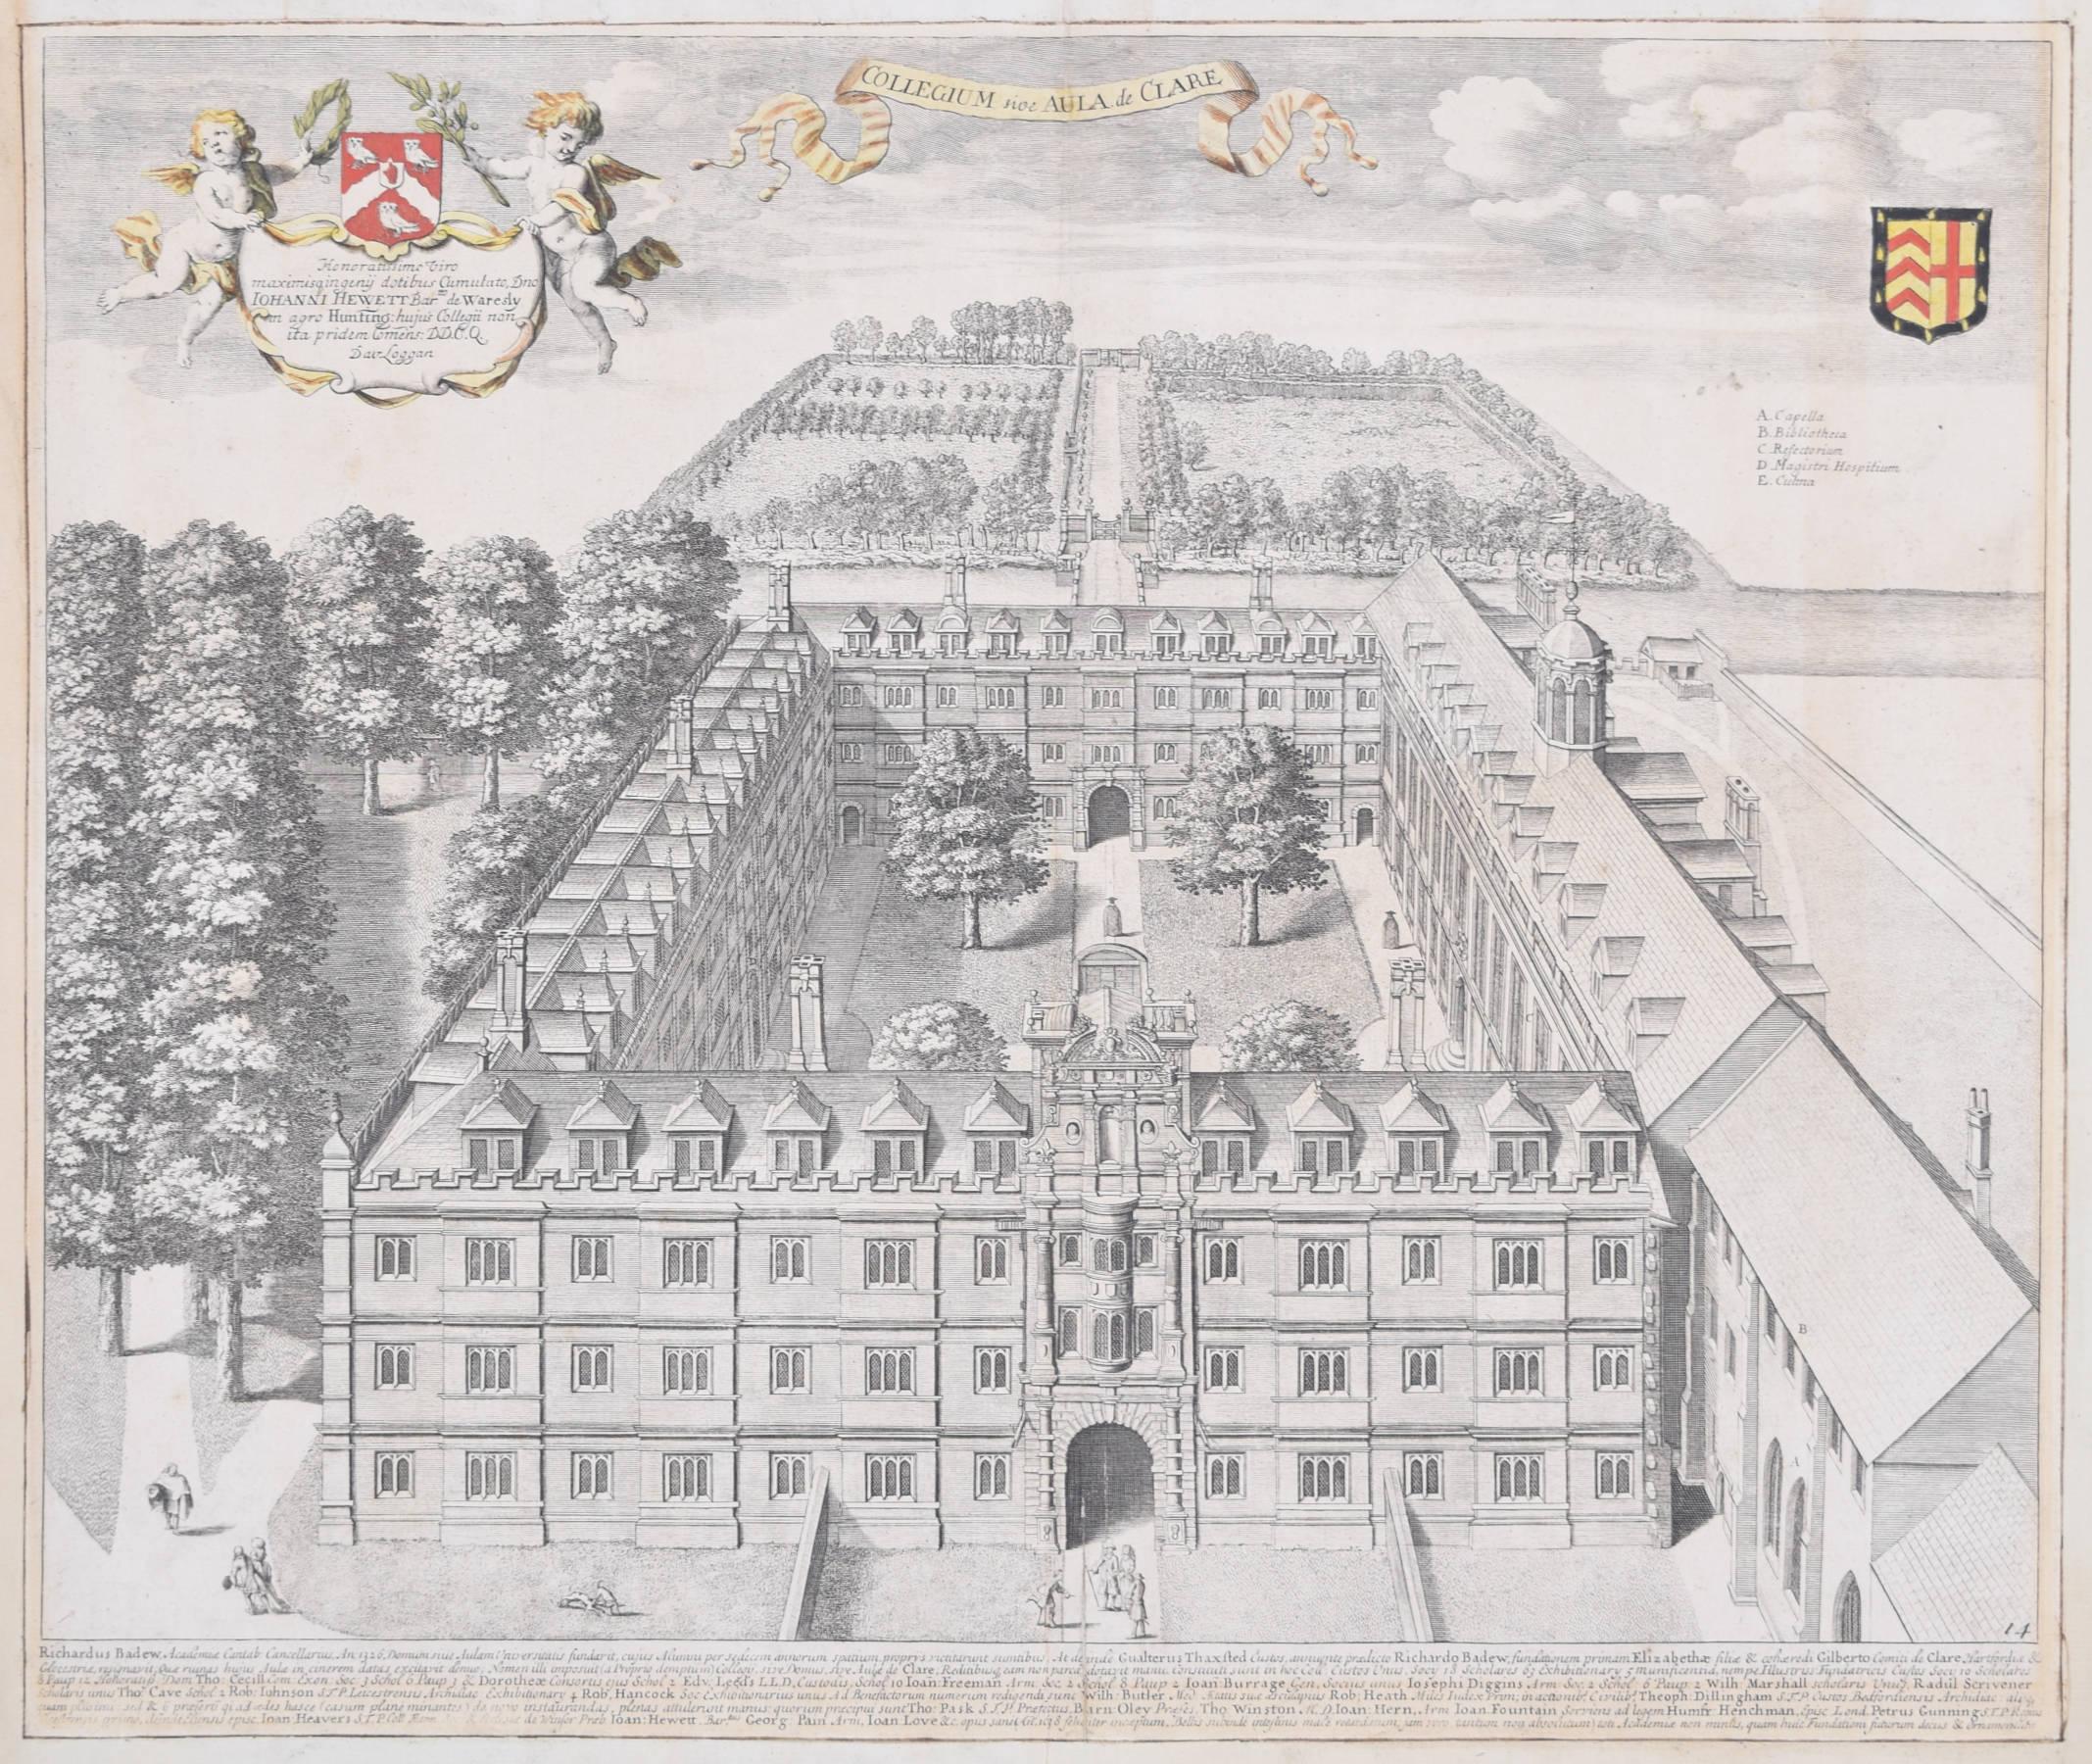 To see our other views of Oxford and Cambridge, scroll down to "More from this Seller" and below it click on "See all from this Seller" - or send us a message if you cannot find the view you want.

David Loggan (1634 - 1692)
Clare College,